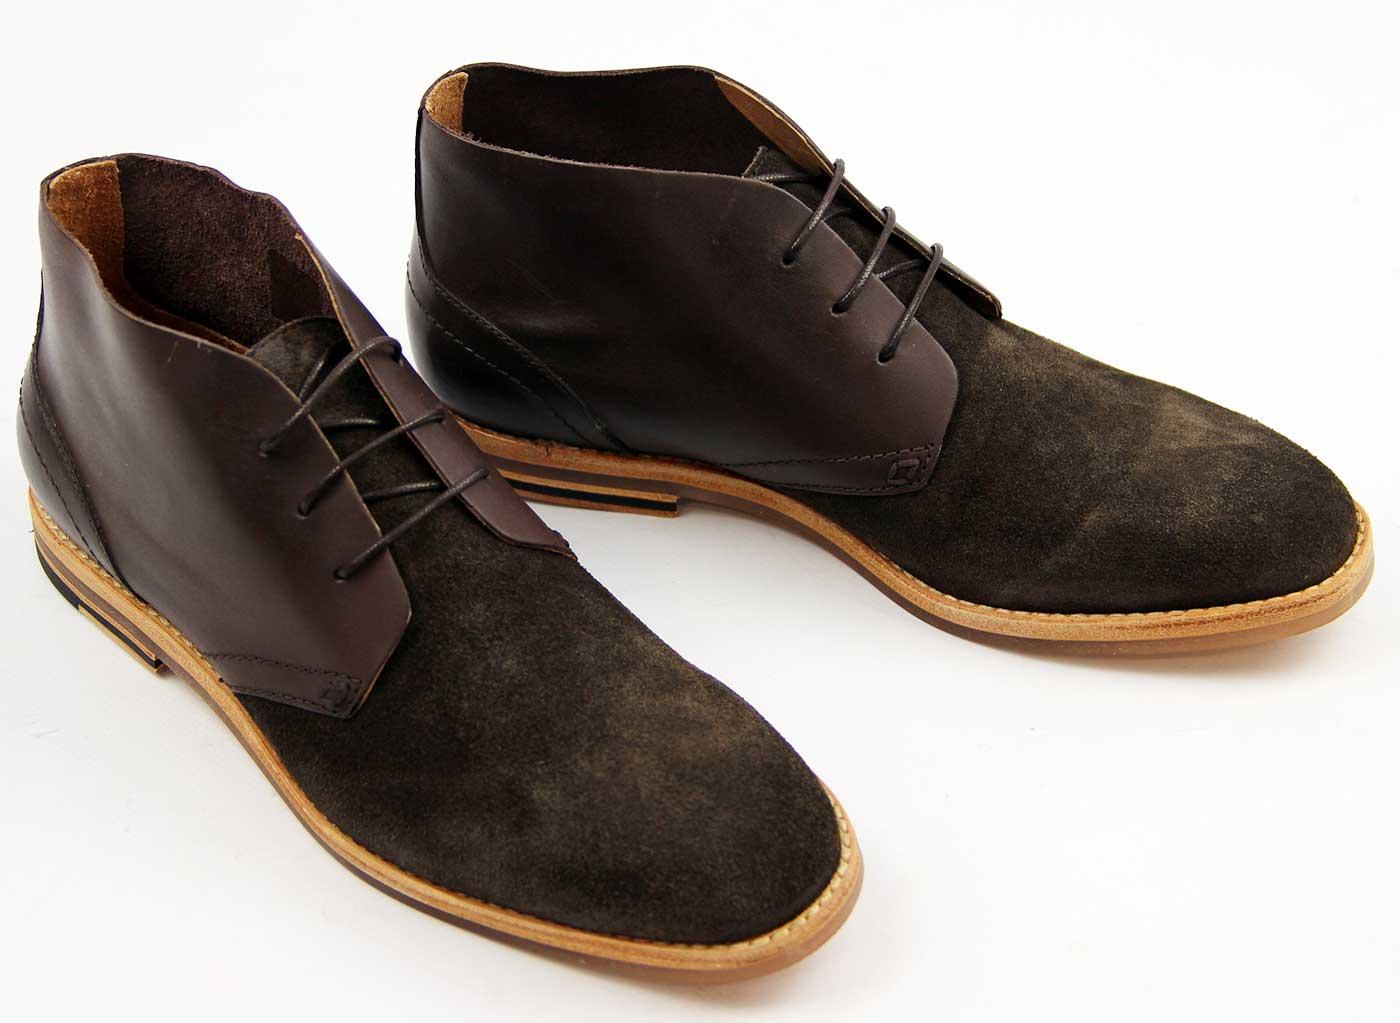 H by HUDSON Houghton Retro Mod Suede & Leather Desert Boots Brown